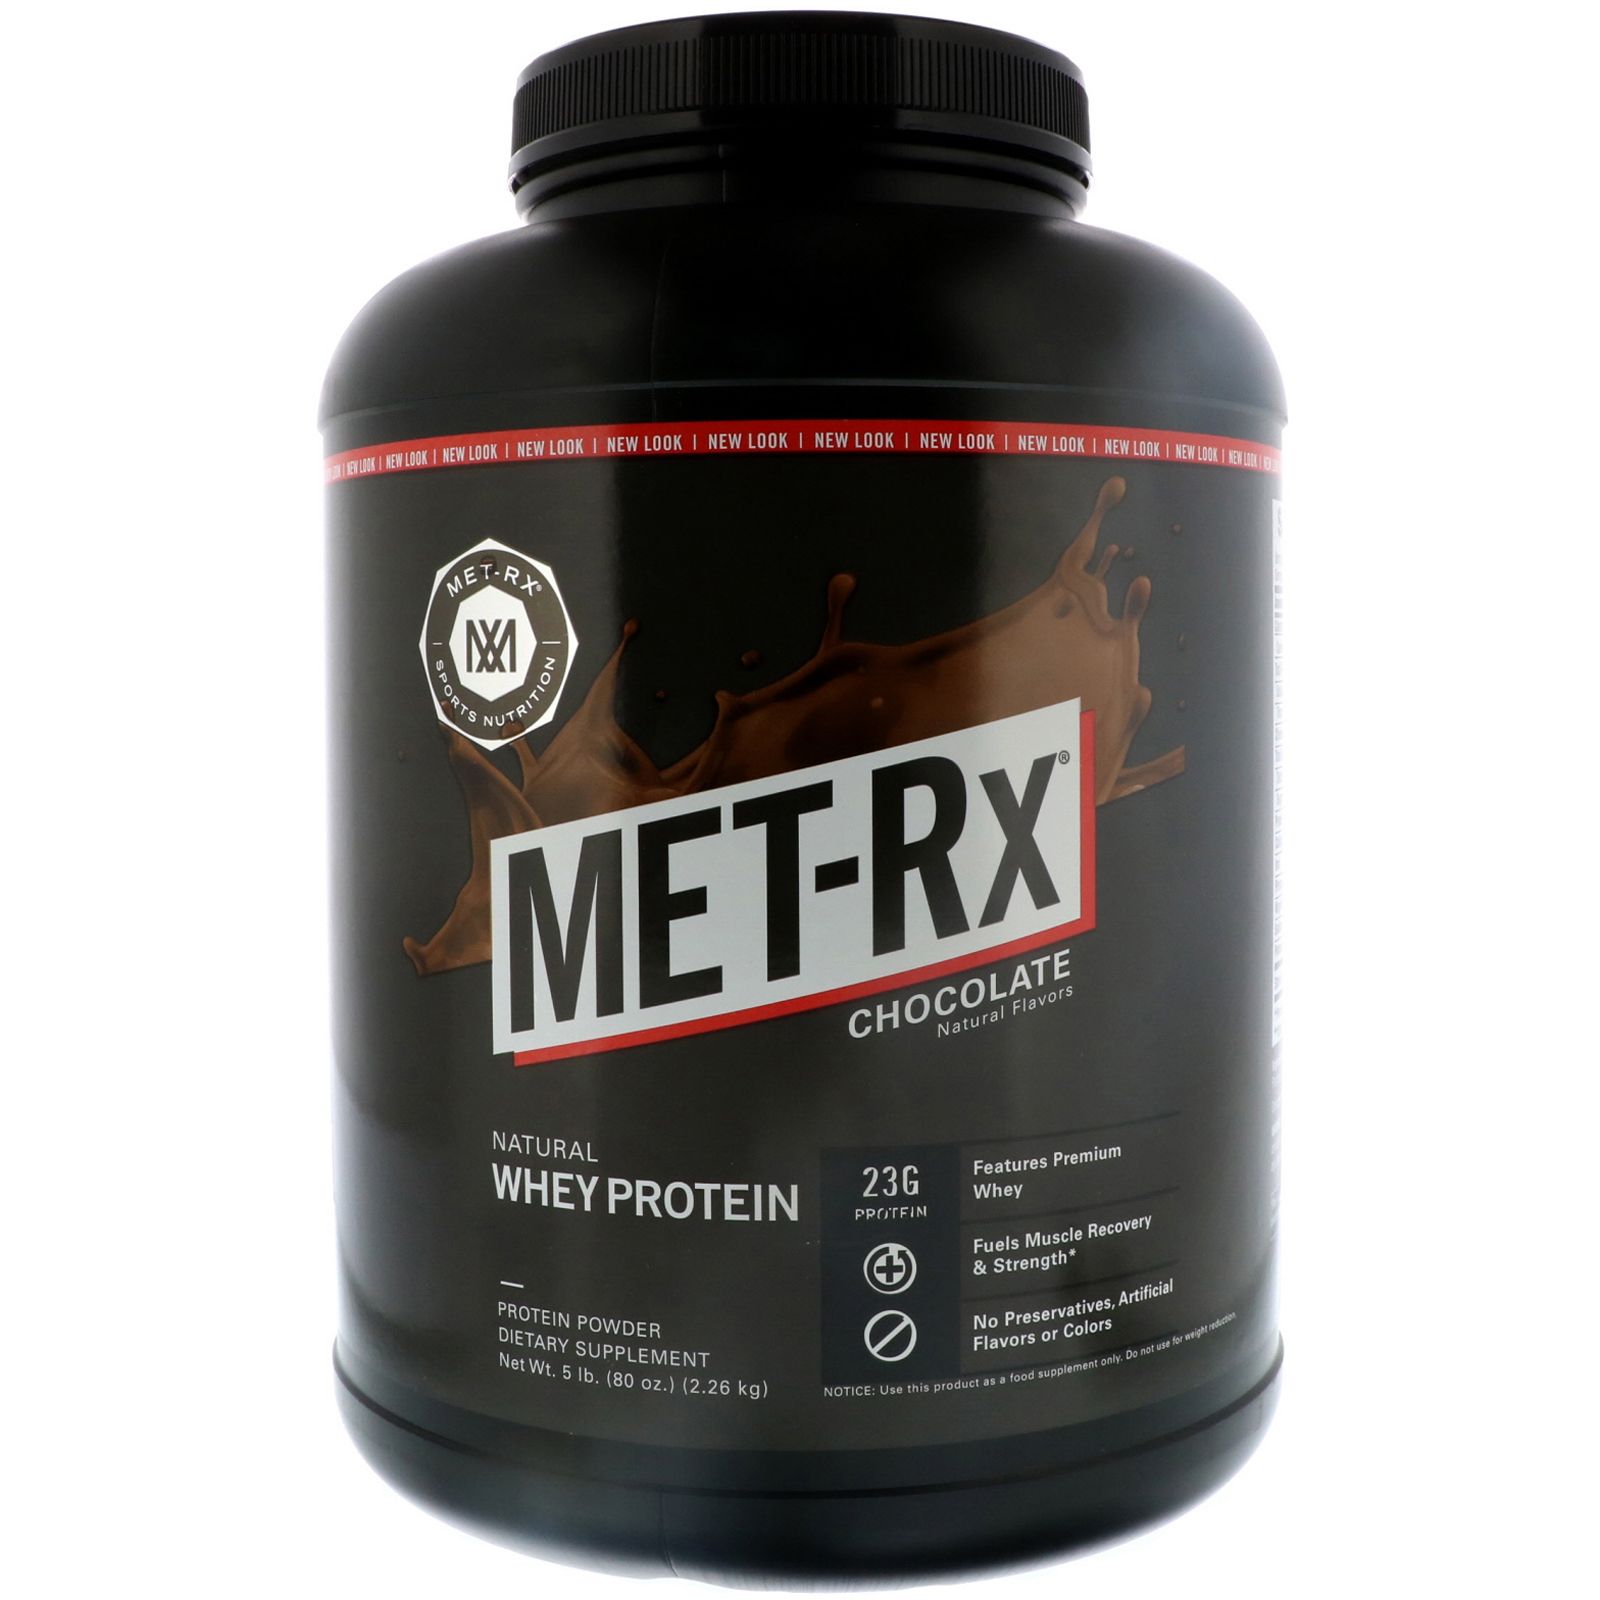 MET-Rx Natural Whey Protein Chocolate 80 oz (2.26 kg) цена и фото